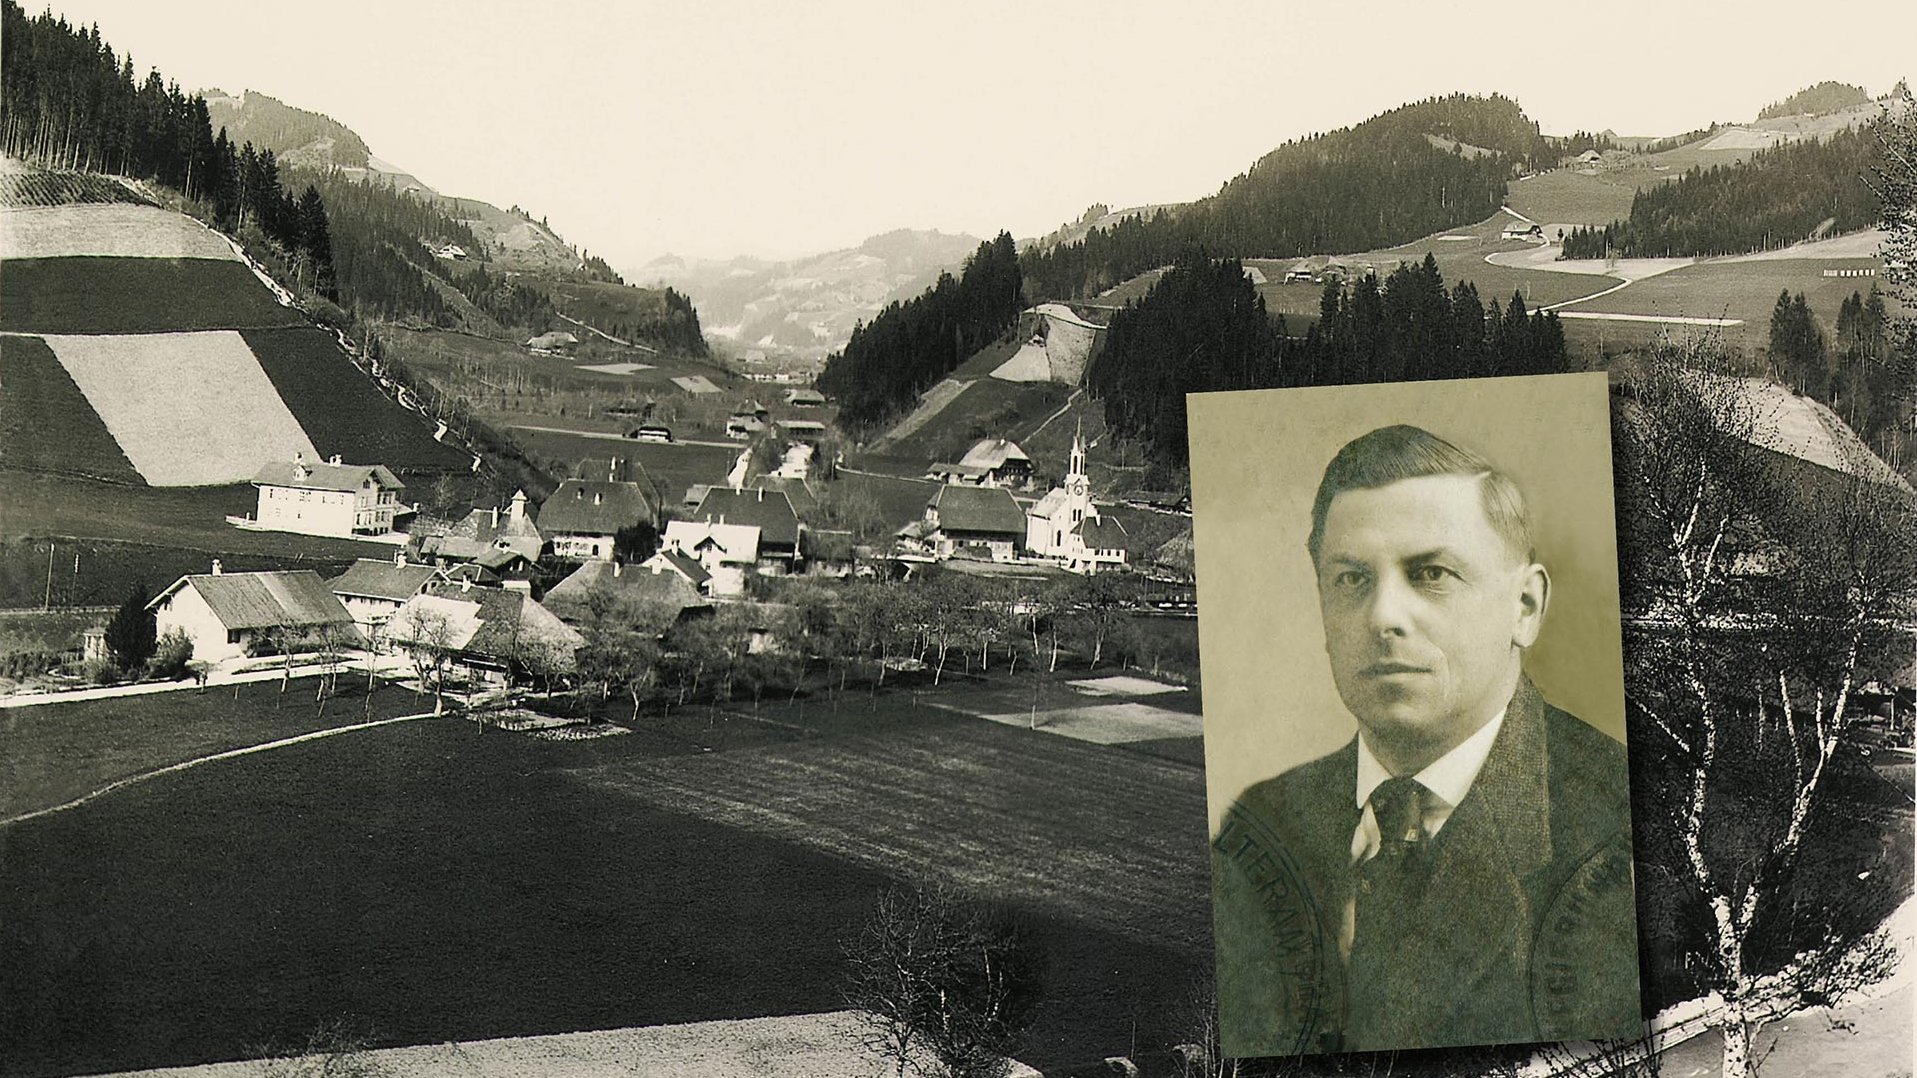 Image collage with foto of Trubschachen 1904 and a portrait of Hans Jakob